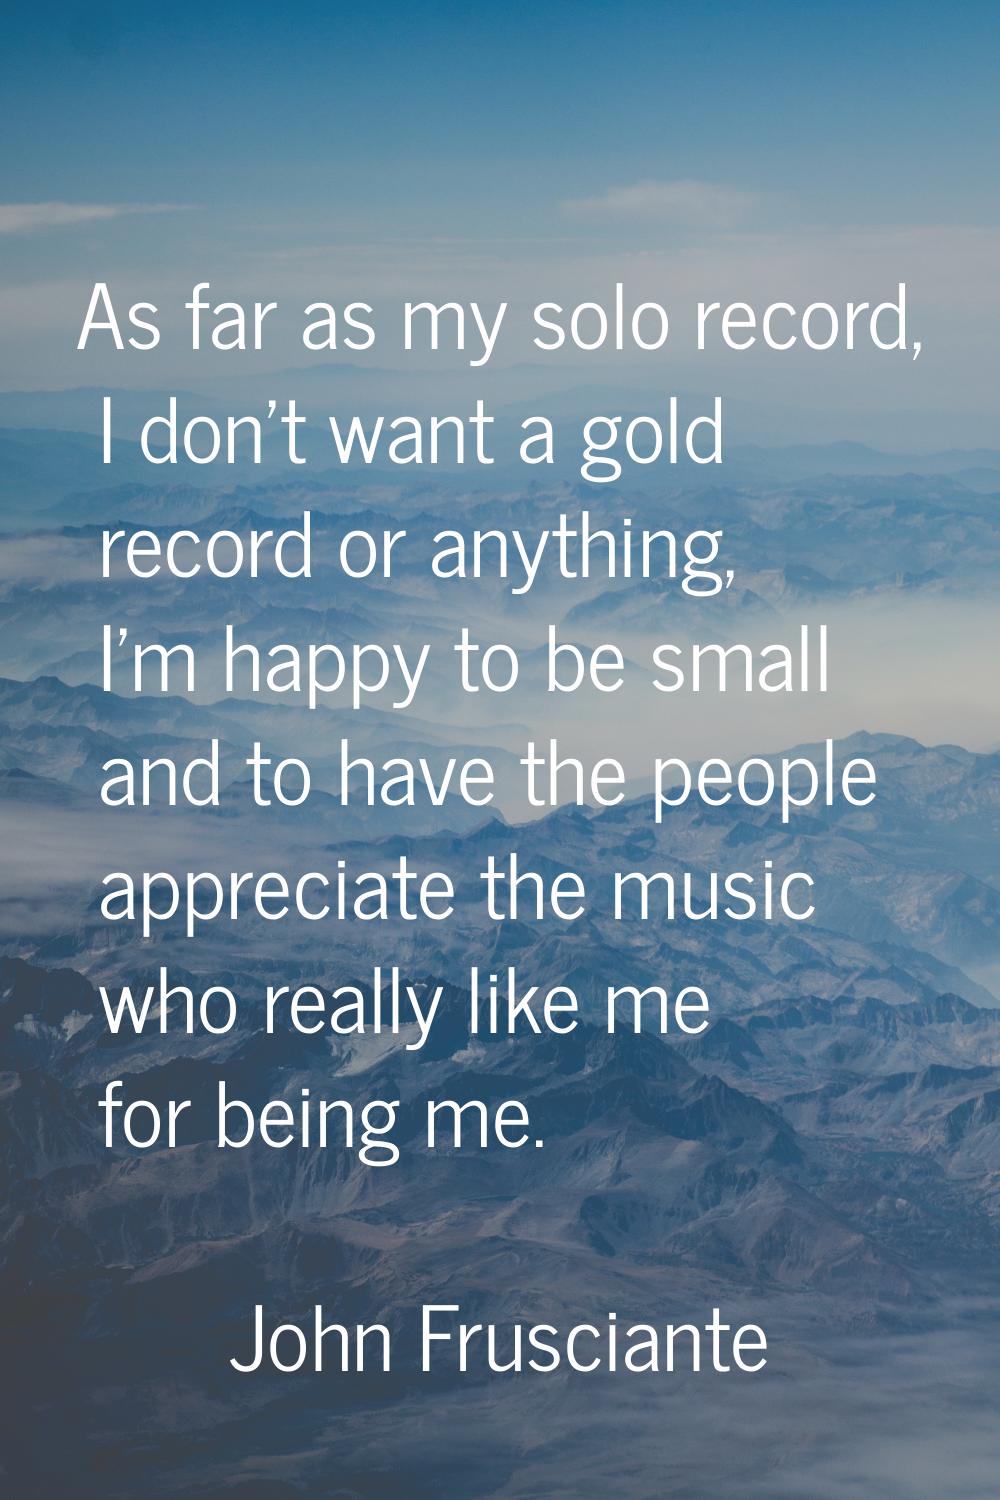 As far as my solo record, I don't want a gold record or anything, I'm happy to be small and to have